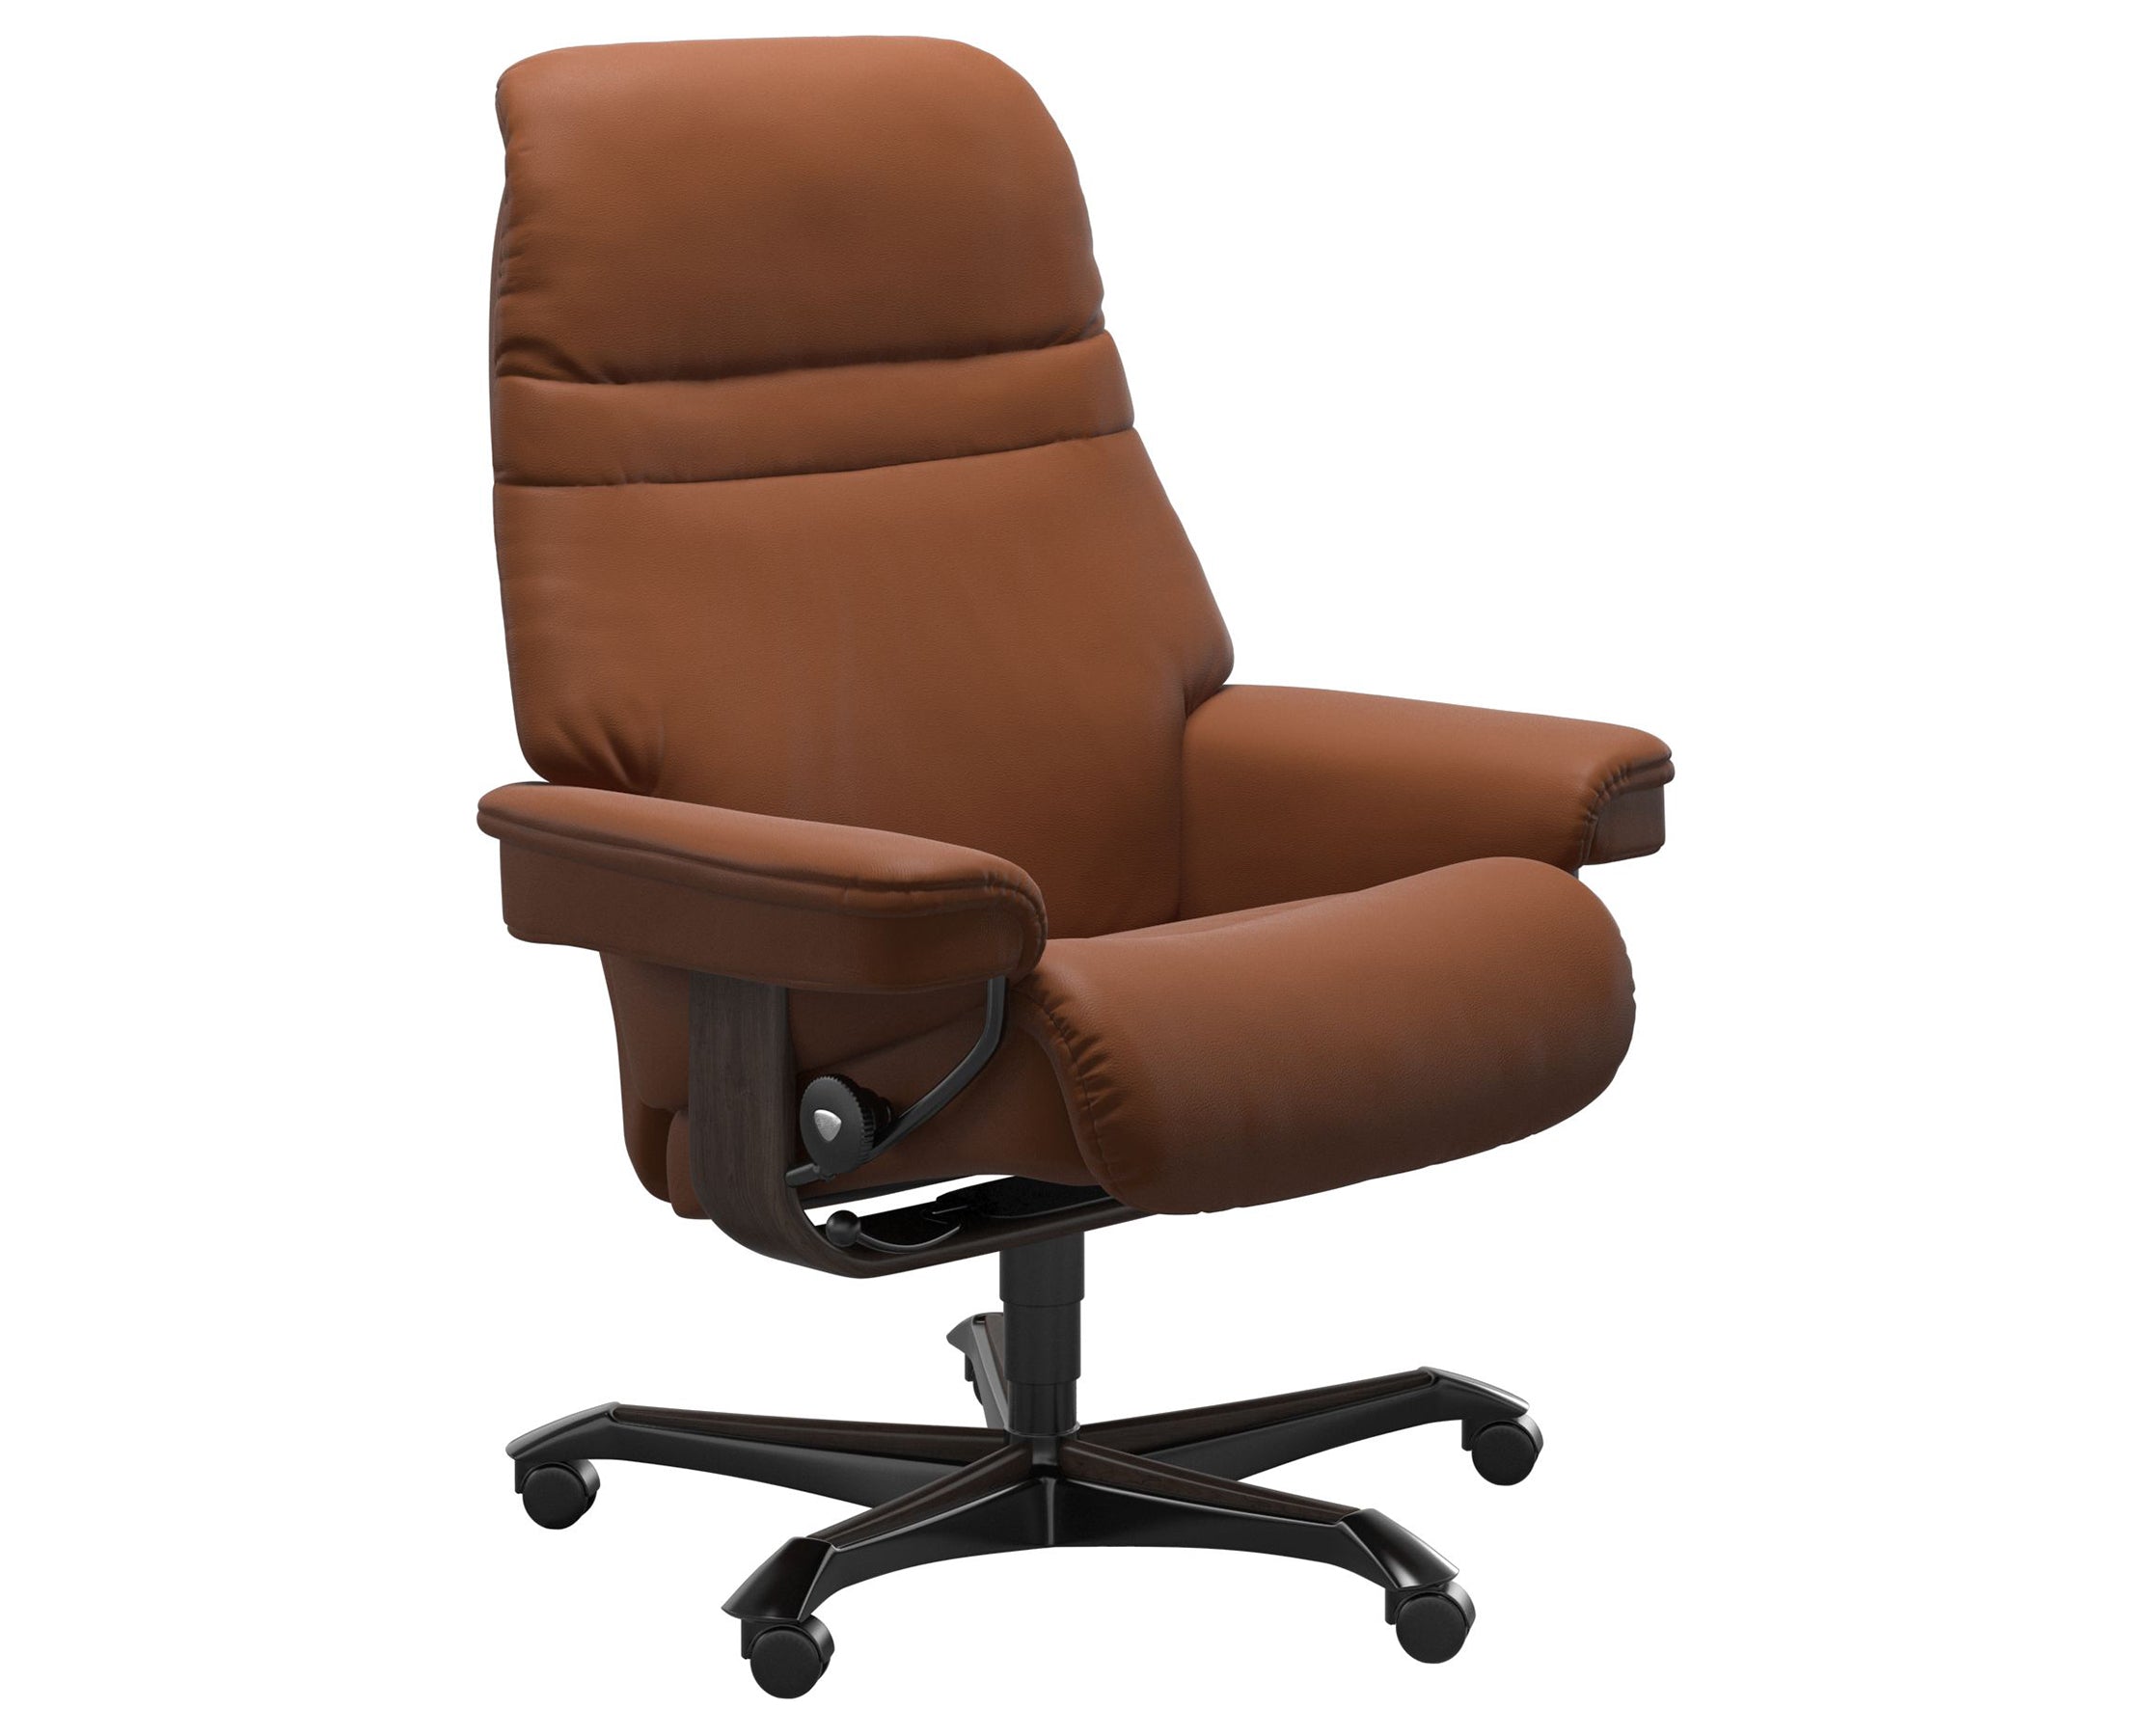 Paloma Leather New Cognac M and Wenge Base | Stressless Sunrise Home Office Chair | Valley Ridge Furniture